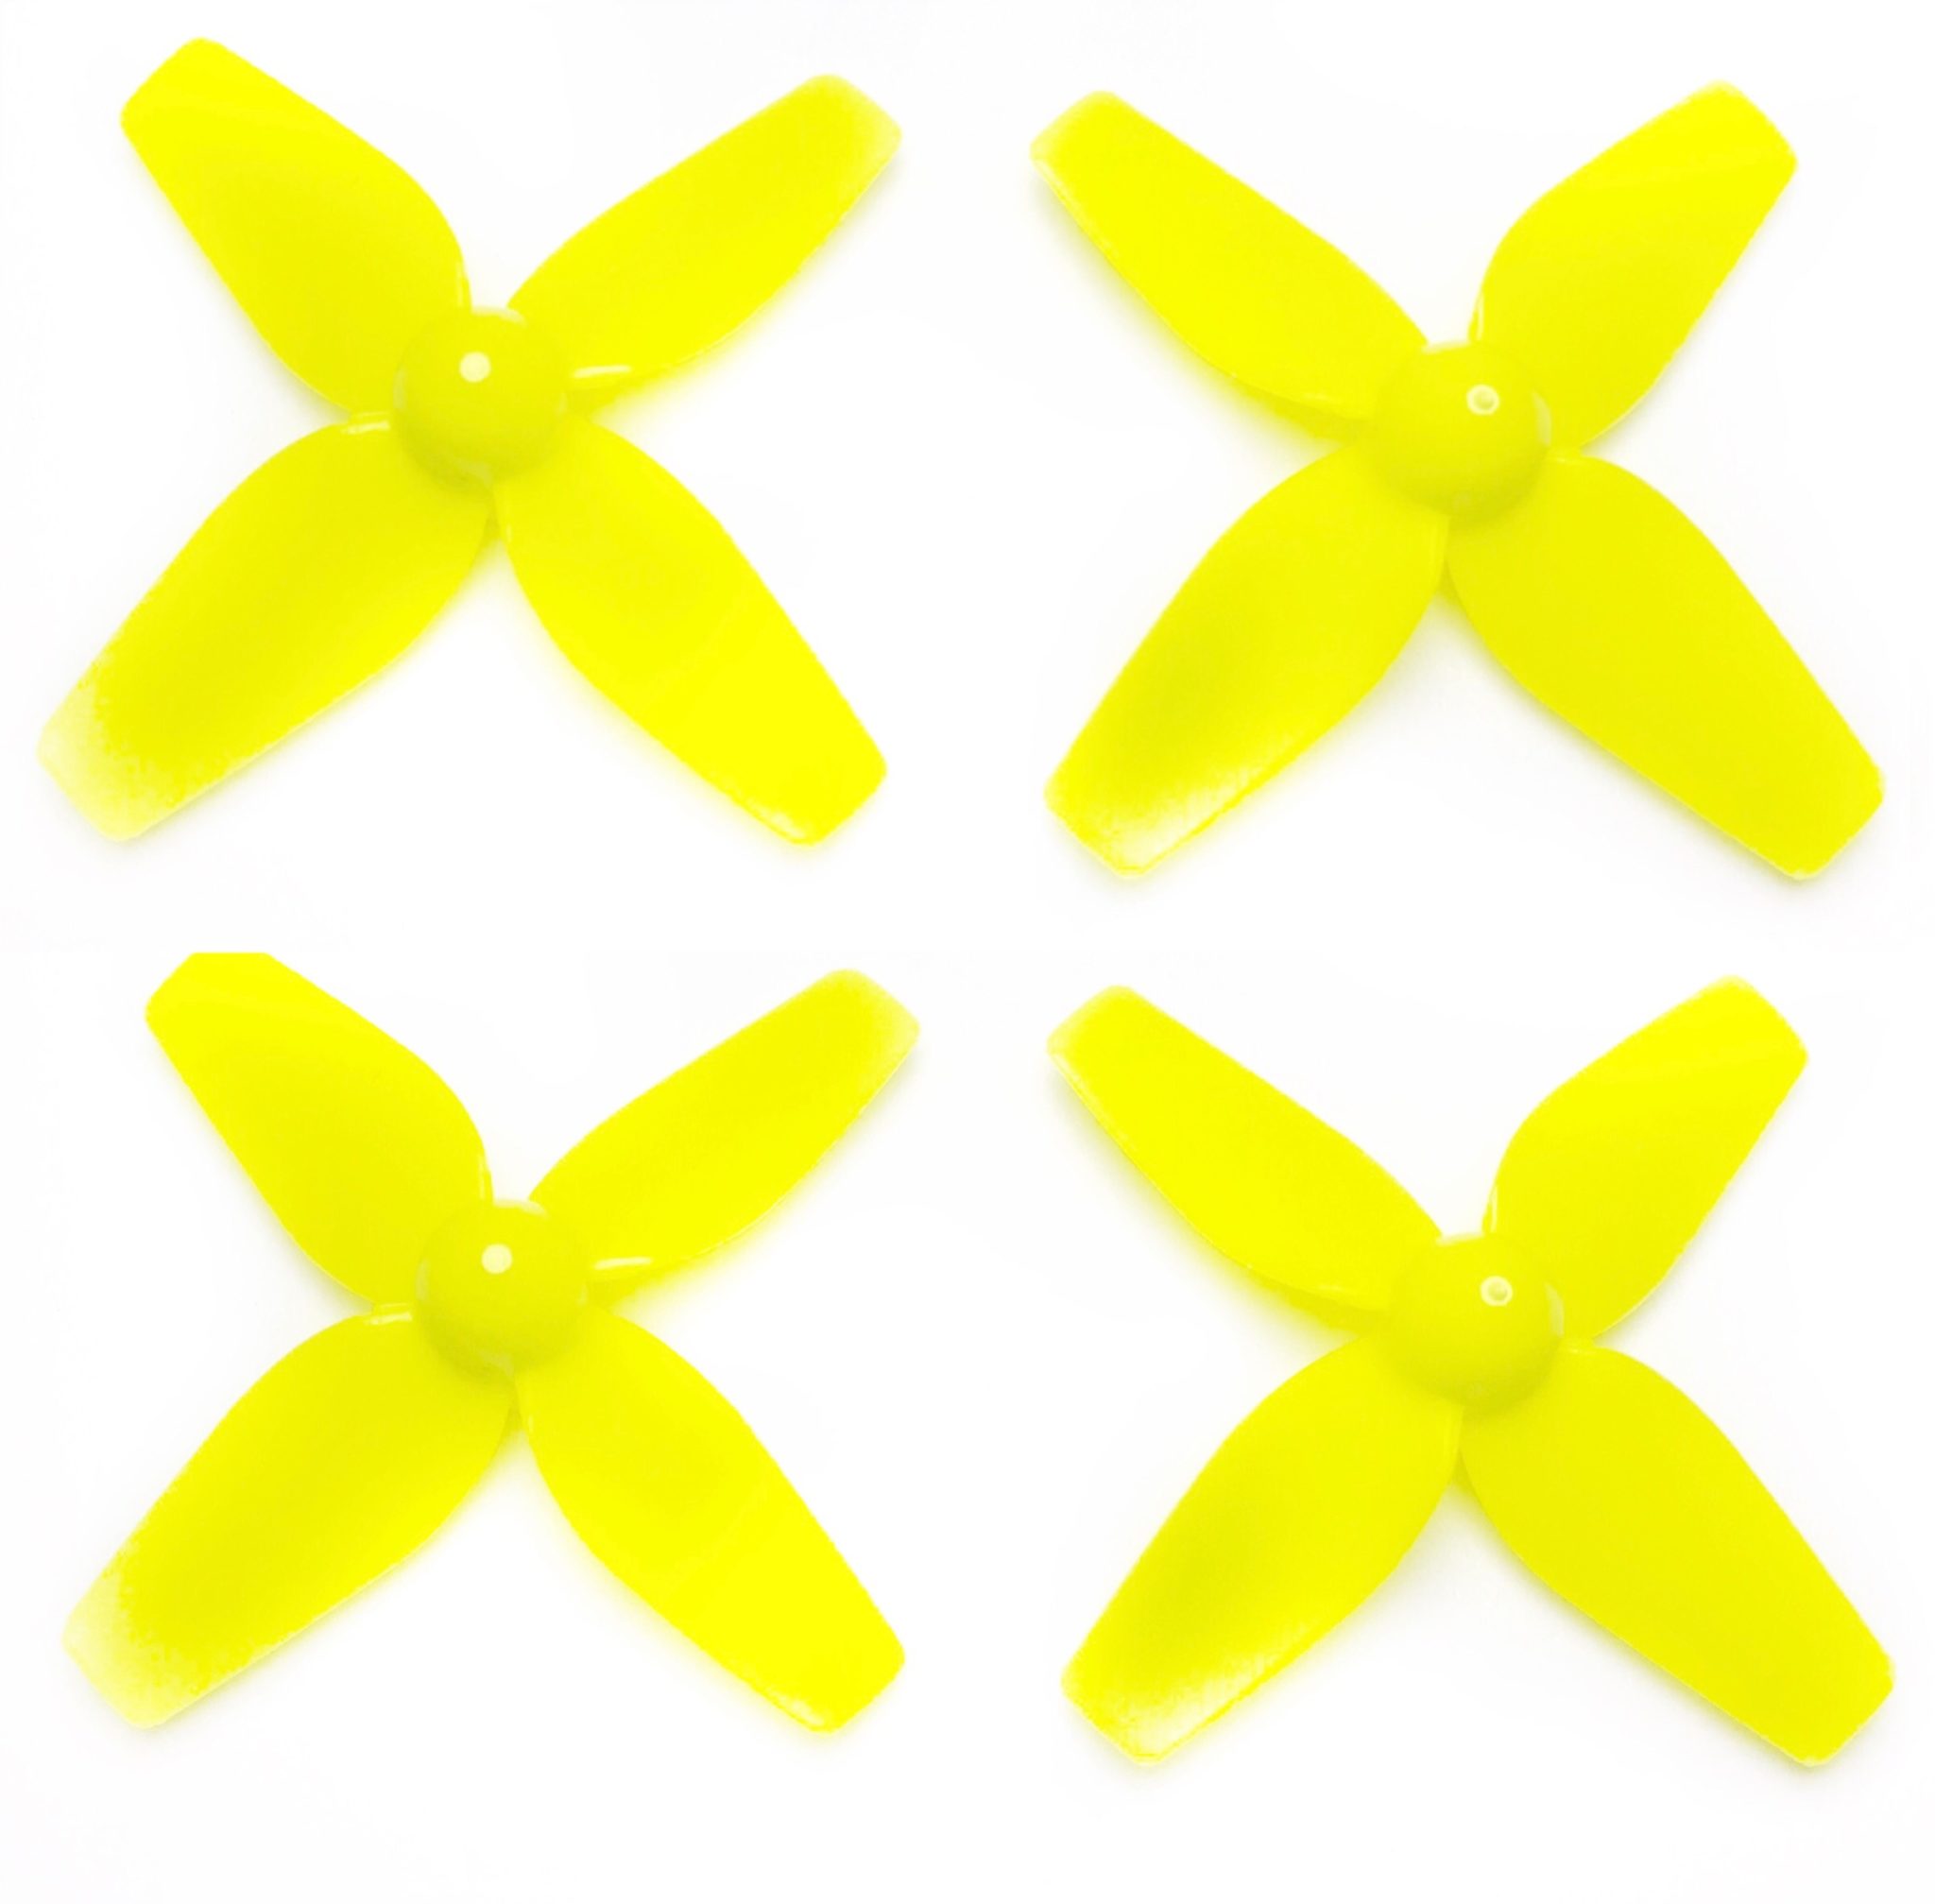 10 pairs Eachine 41mm 4 Blades Propeller (10CW, 10CCW) Yellow